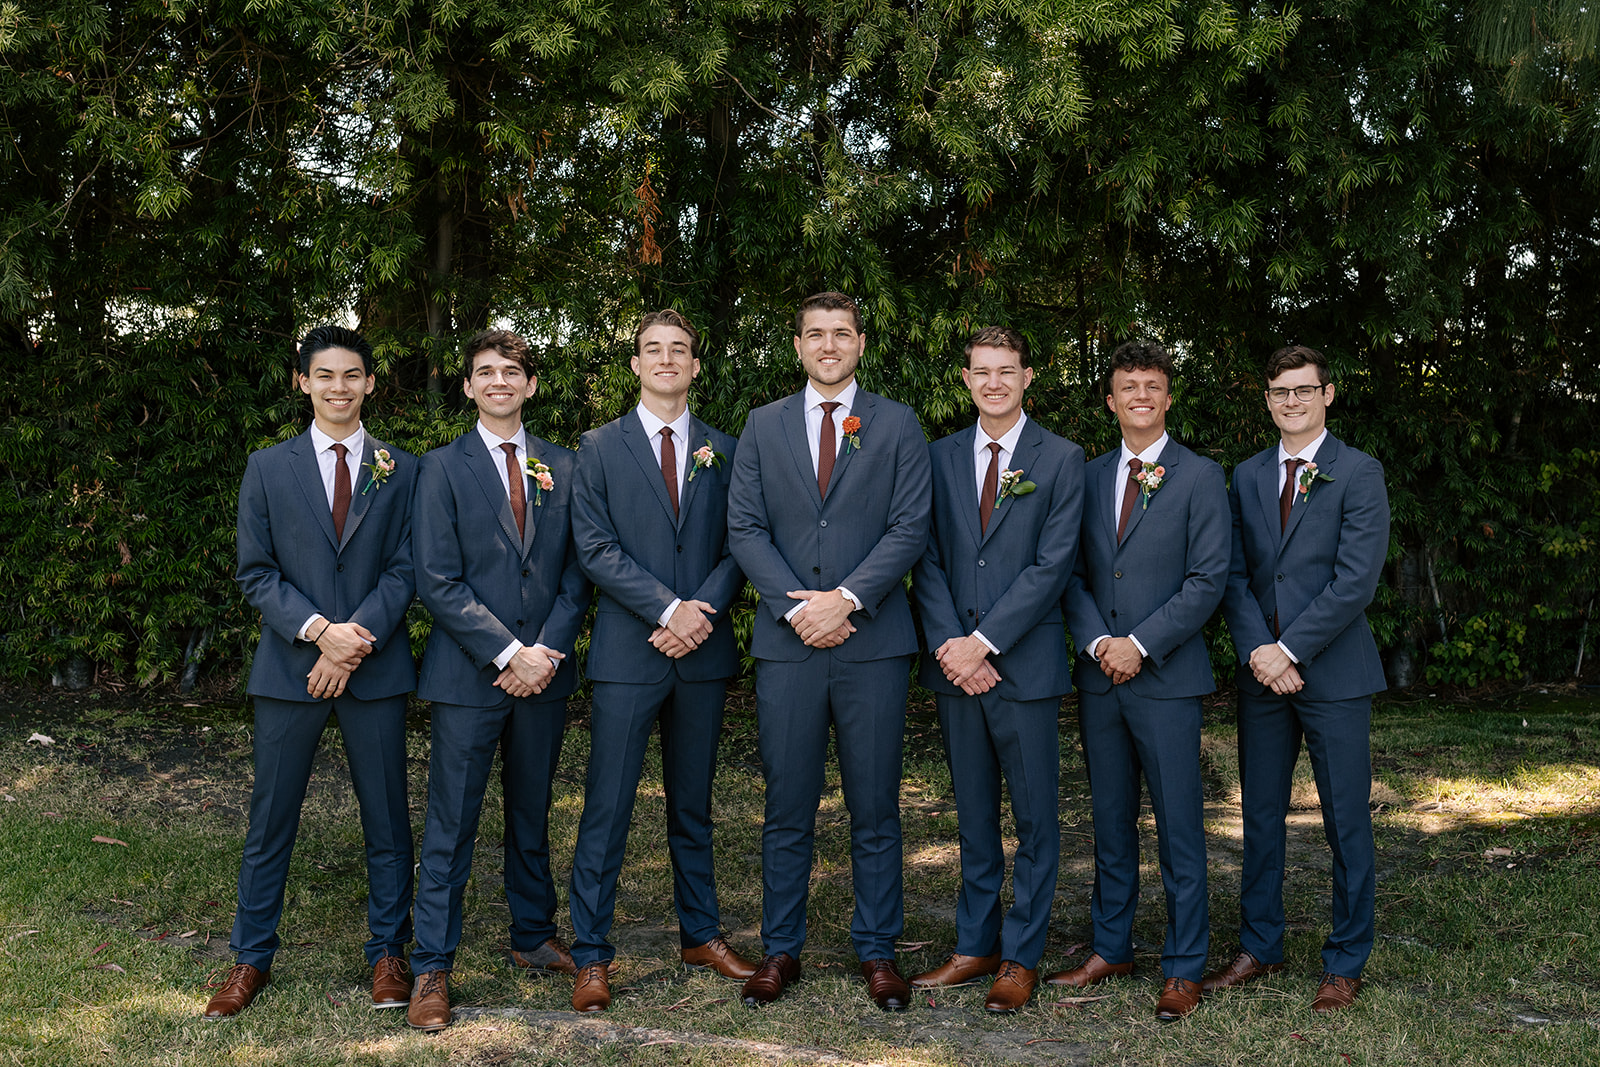 griffith house anaheim california socal orange county wedding groomsmen pictures navy blue suits groom red boutonnieres